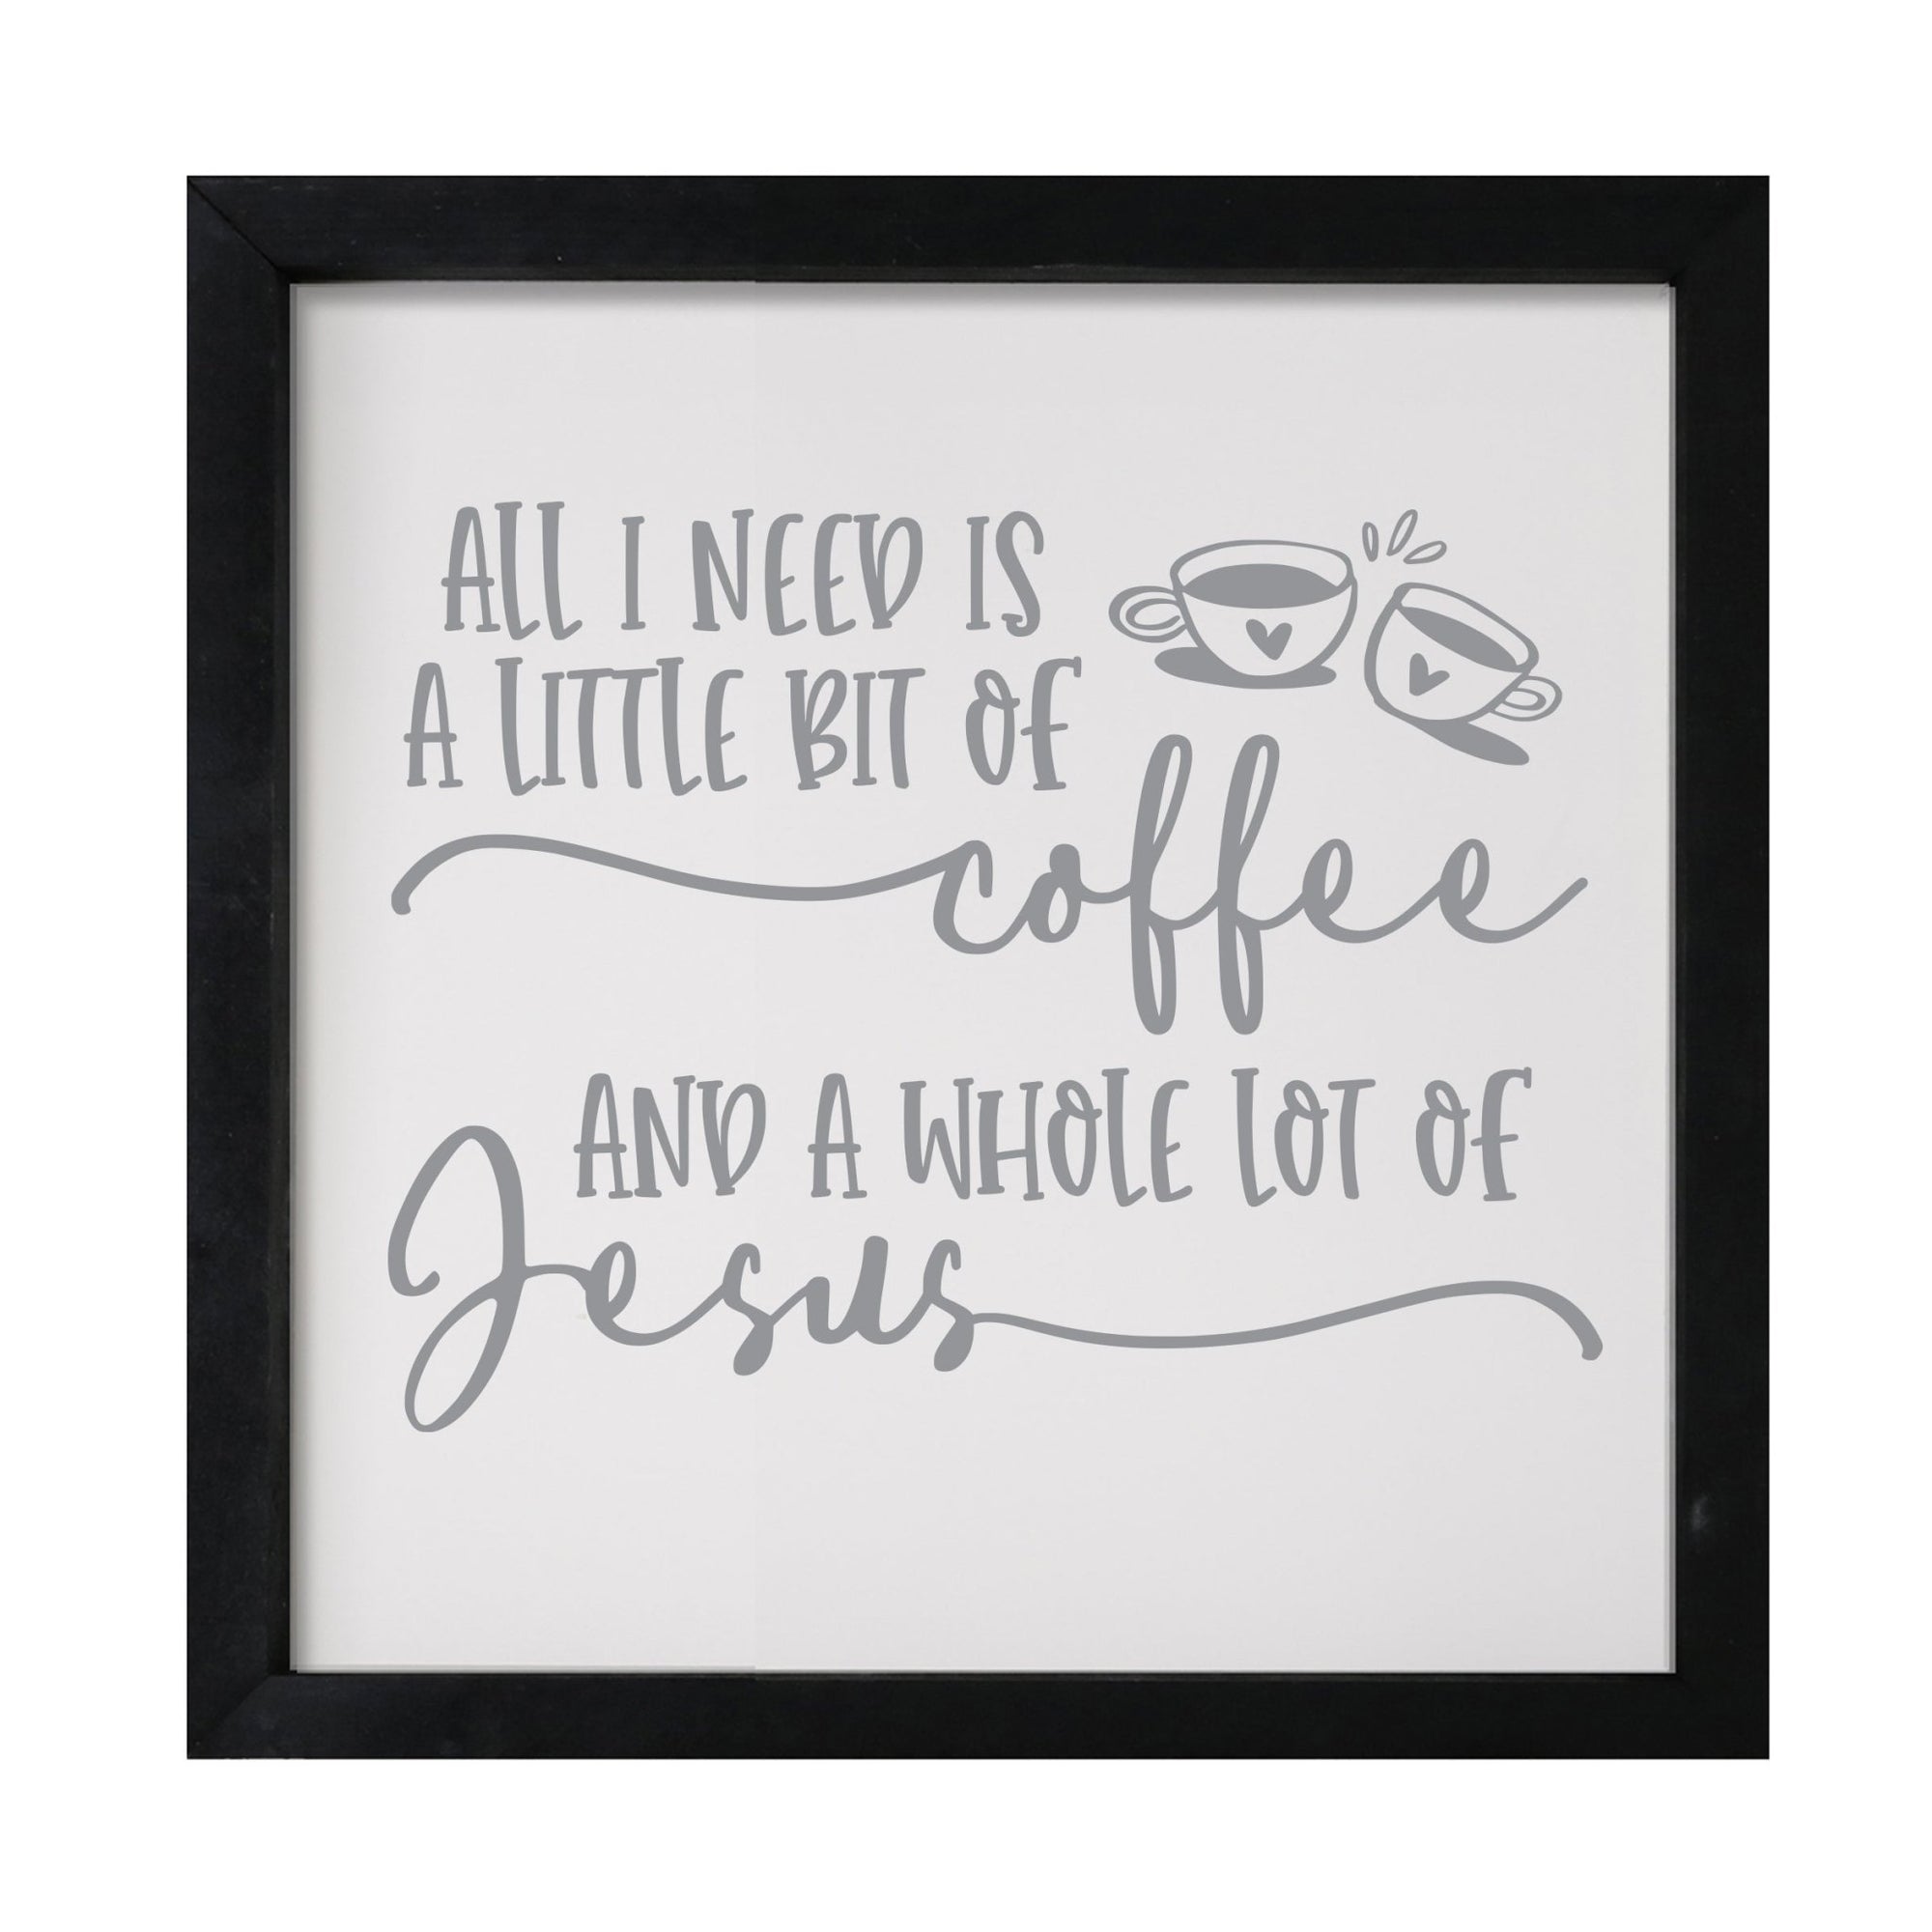 Inspiring Modern Framed Shadow Box 7x7in - All I Need Is A Little Bit Of Coffee - LifeSong Milestones